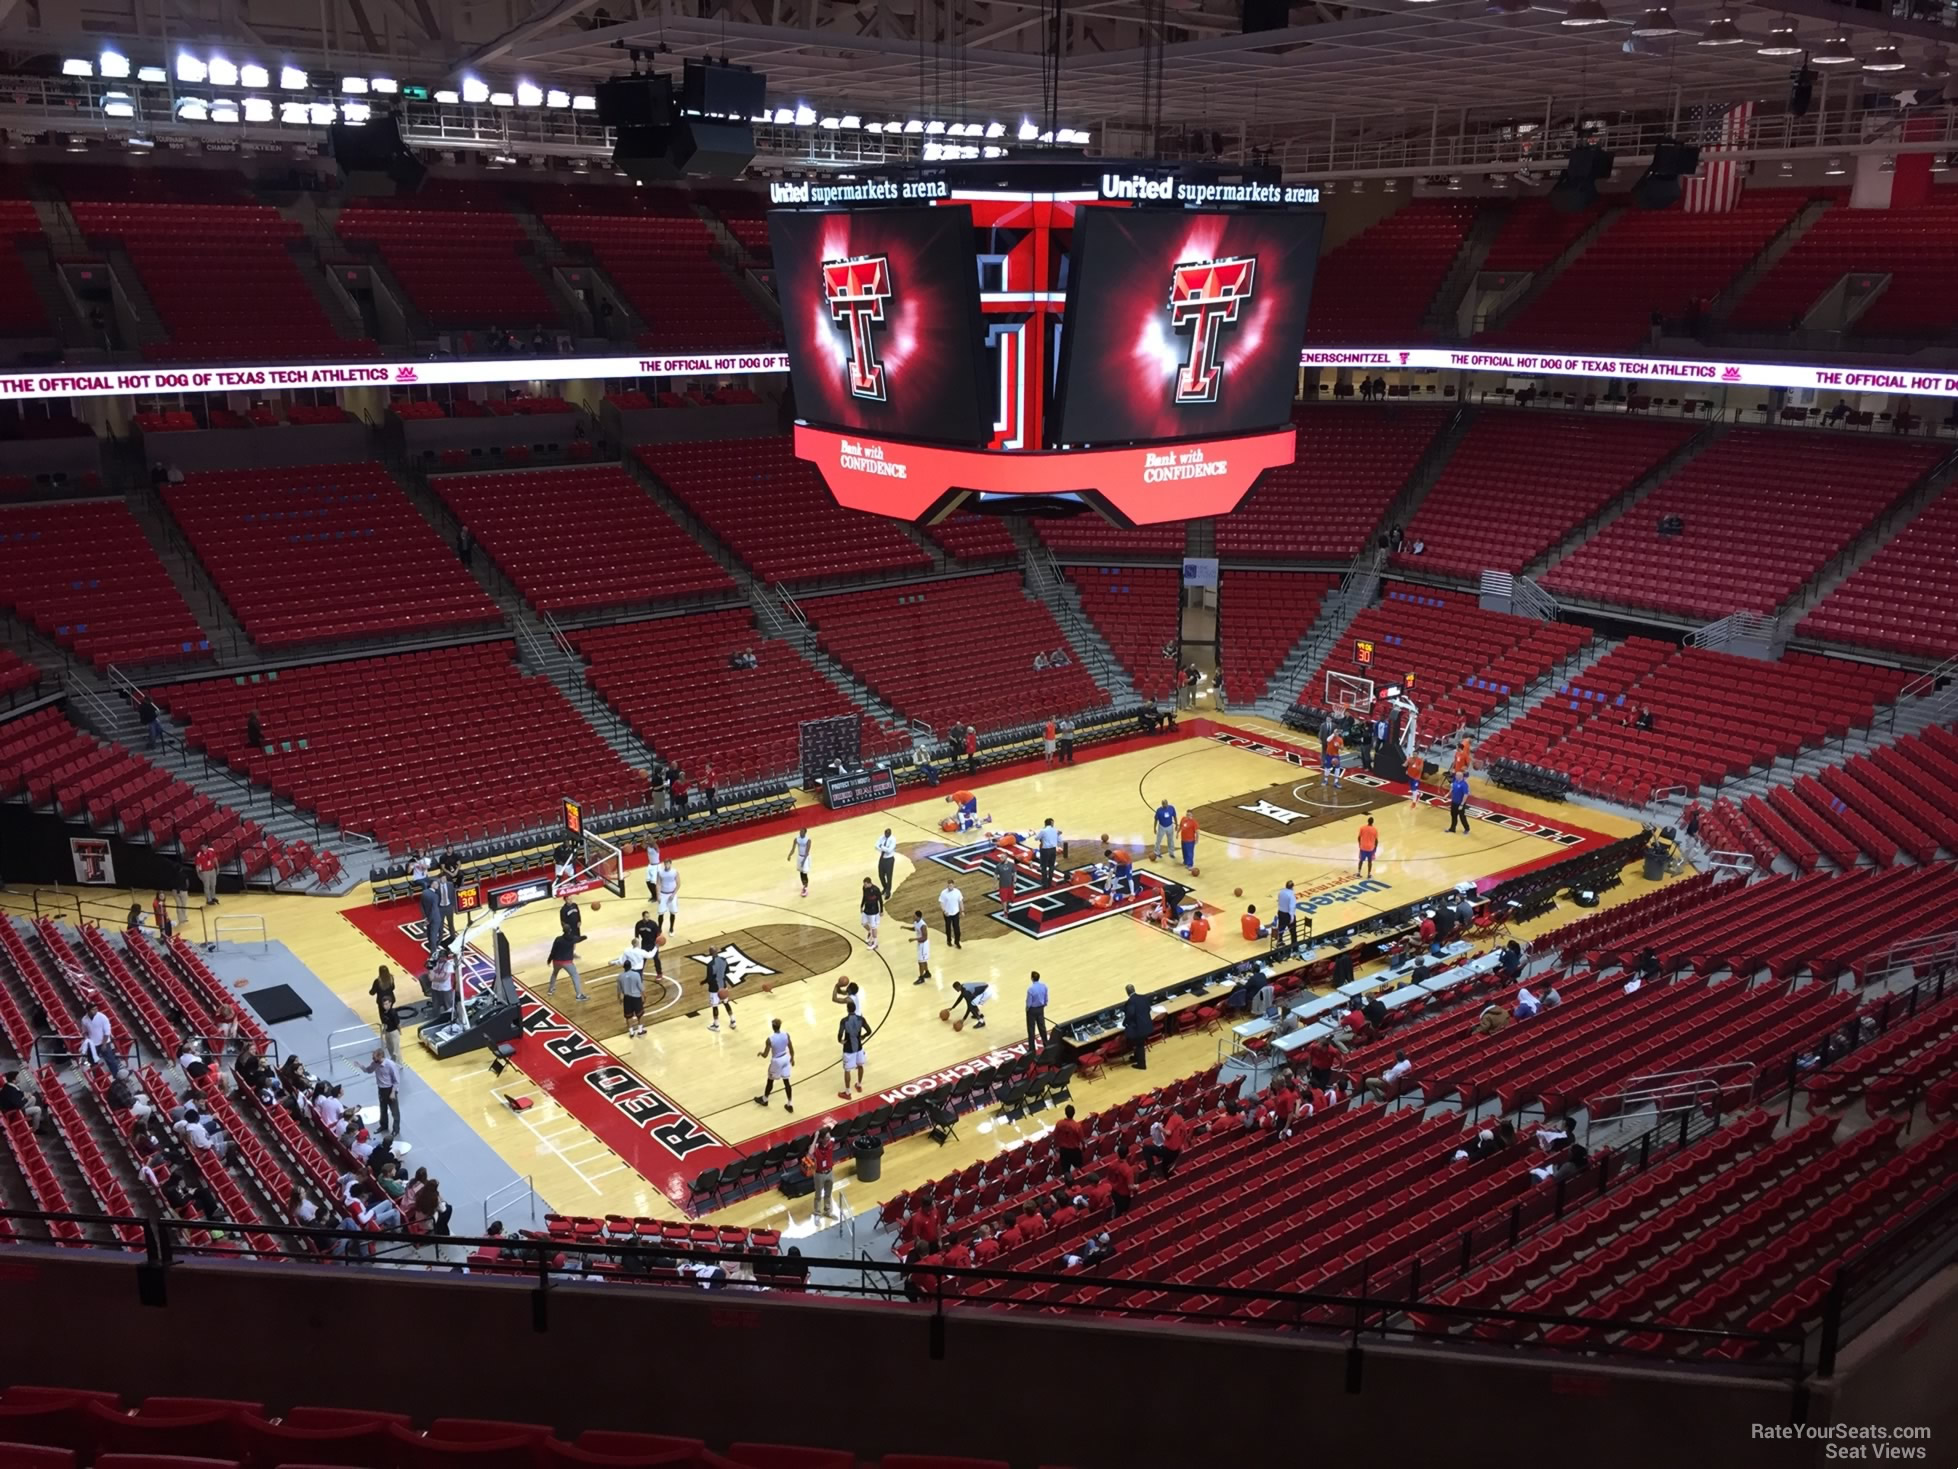 section 220, row 7 seat view  - united supermarkets arena